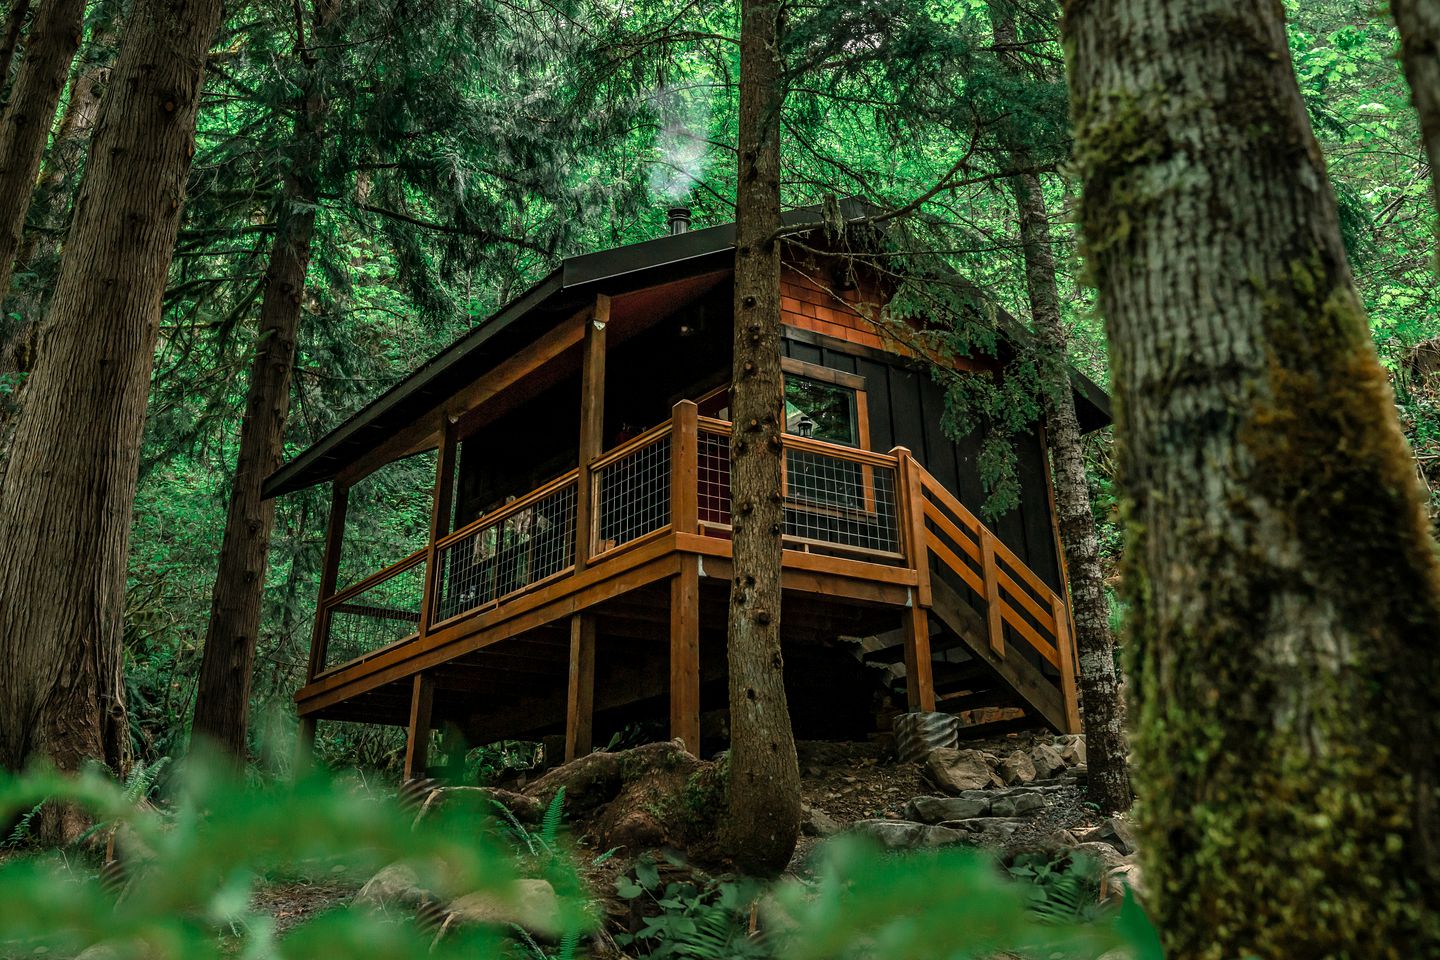 Stay The Weekend At One Of Oregon’s Most Gorgeous Secluded Cabins